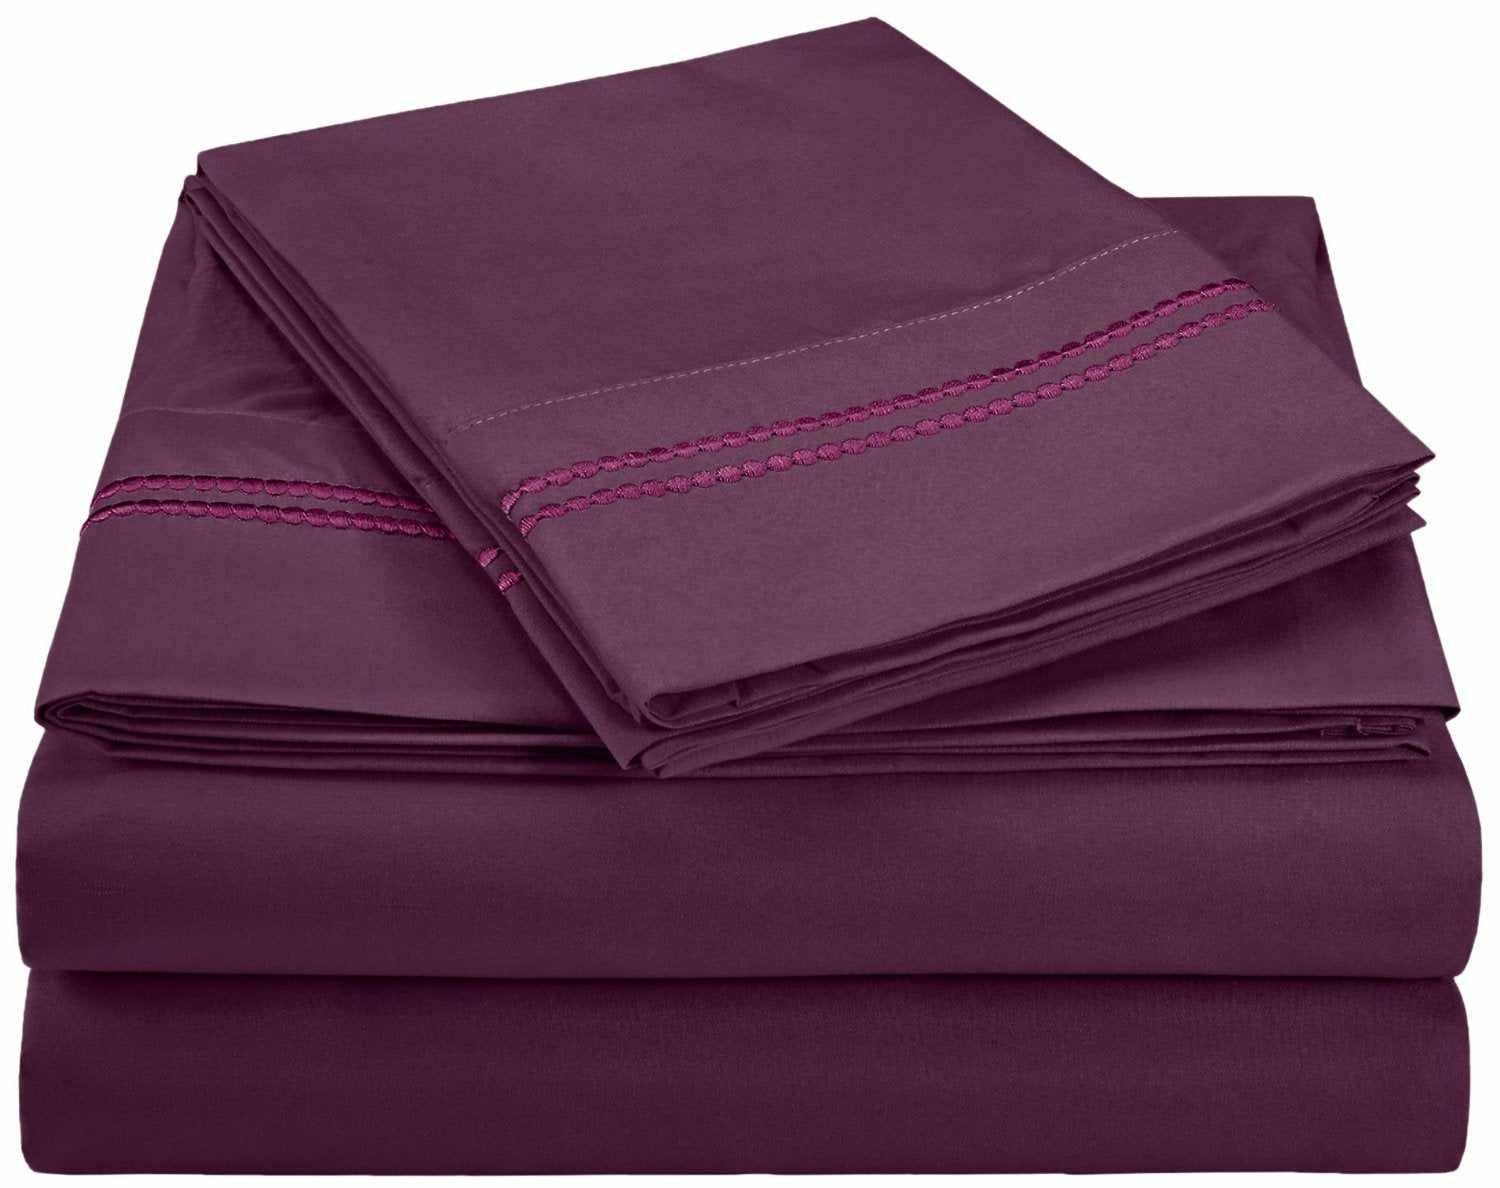 Superior Microfiber Wrinkle Resistant and Breathable Solid 2-Line Embroidery Deep Pocket Bed Sheet Set - Plum